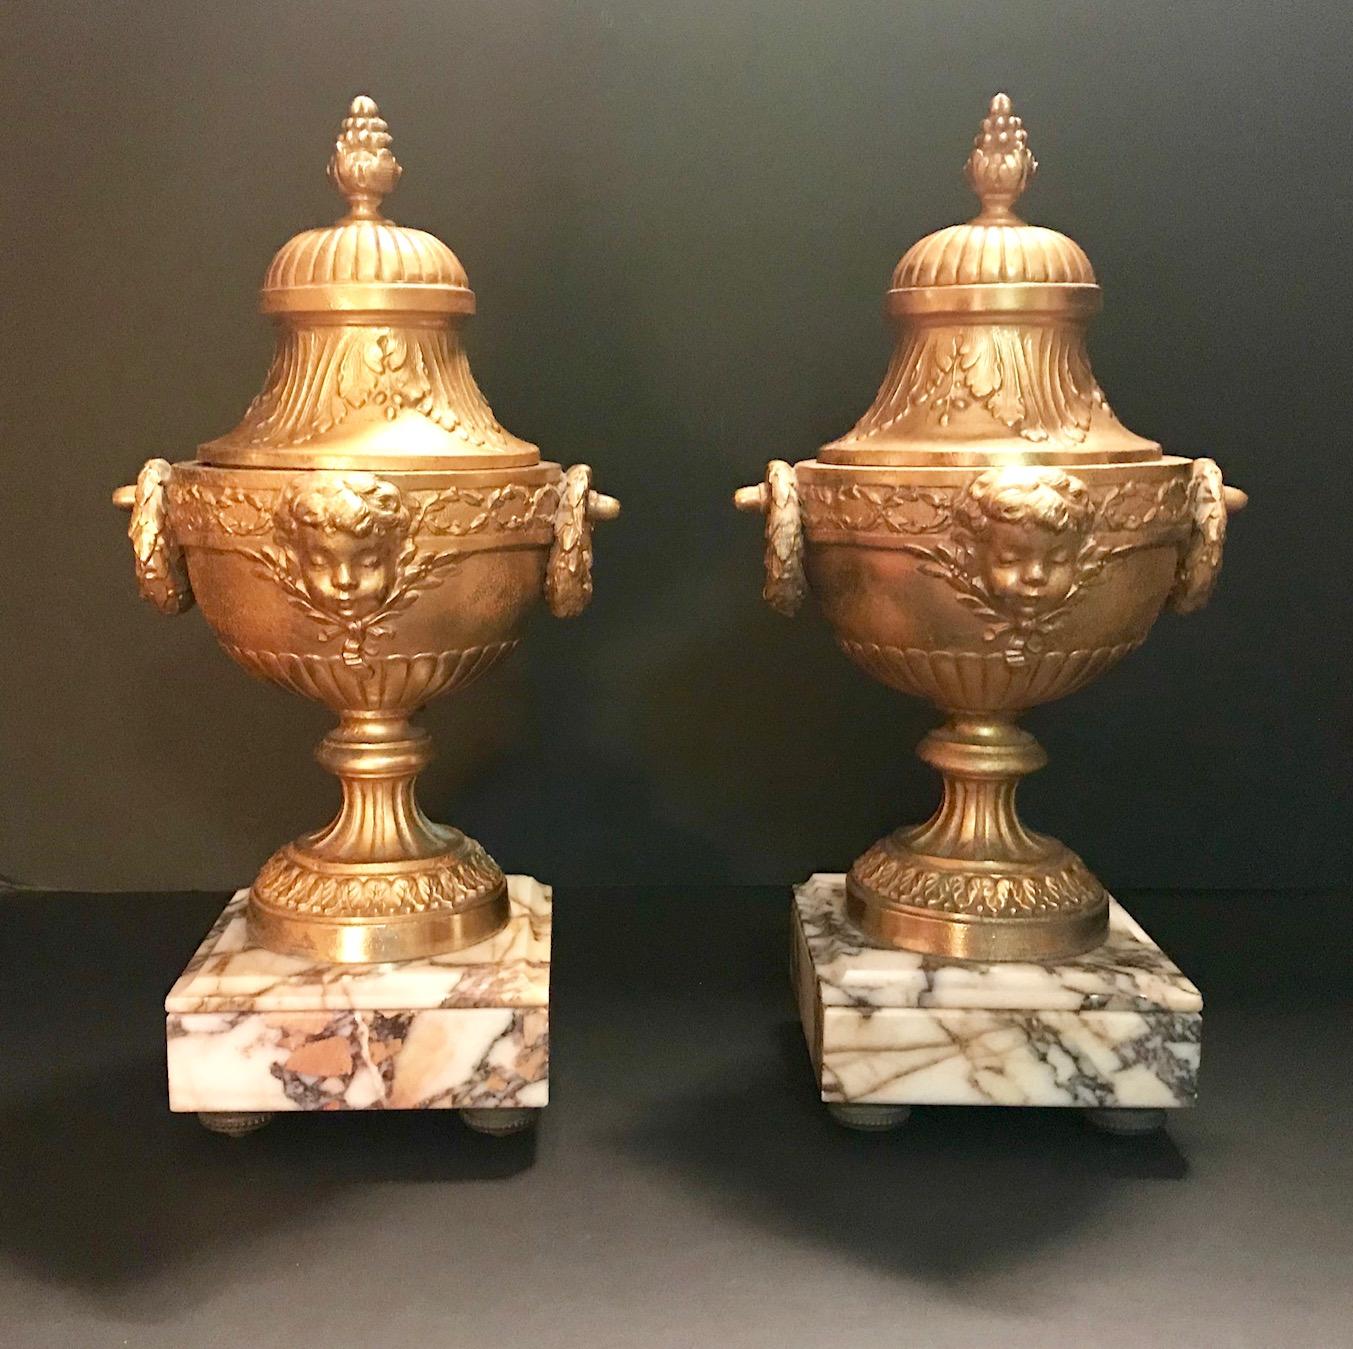 This is a magnificent pair of 19th century gilded bronze urns with highly decorated lids. Two finely detailed laurel wreaths serve as handles on each side while the front center is decorated with a beautiful putto face. The body is adorned in